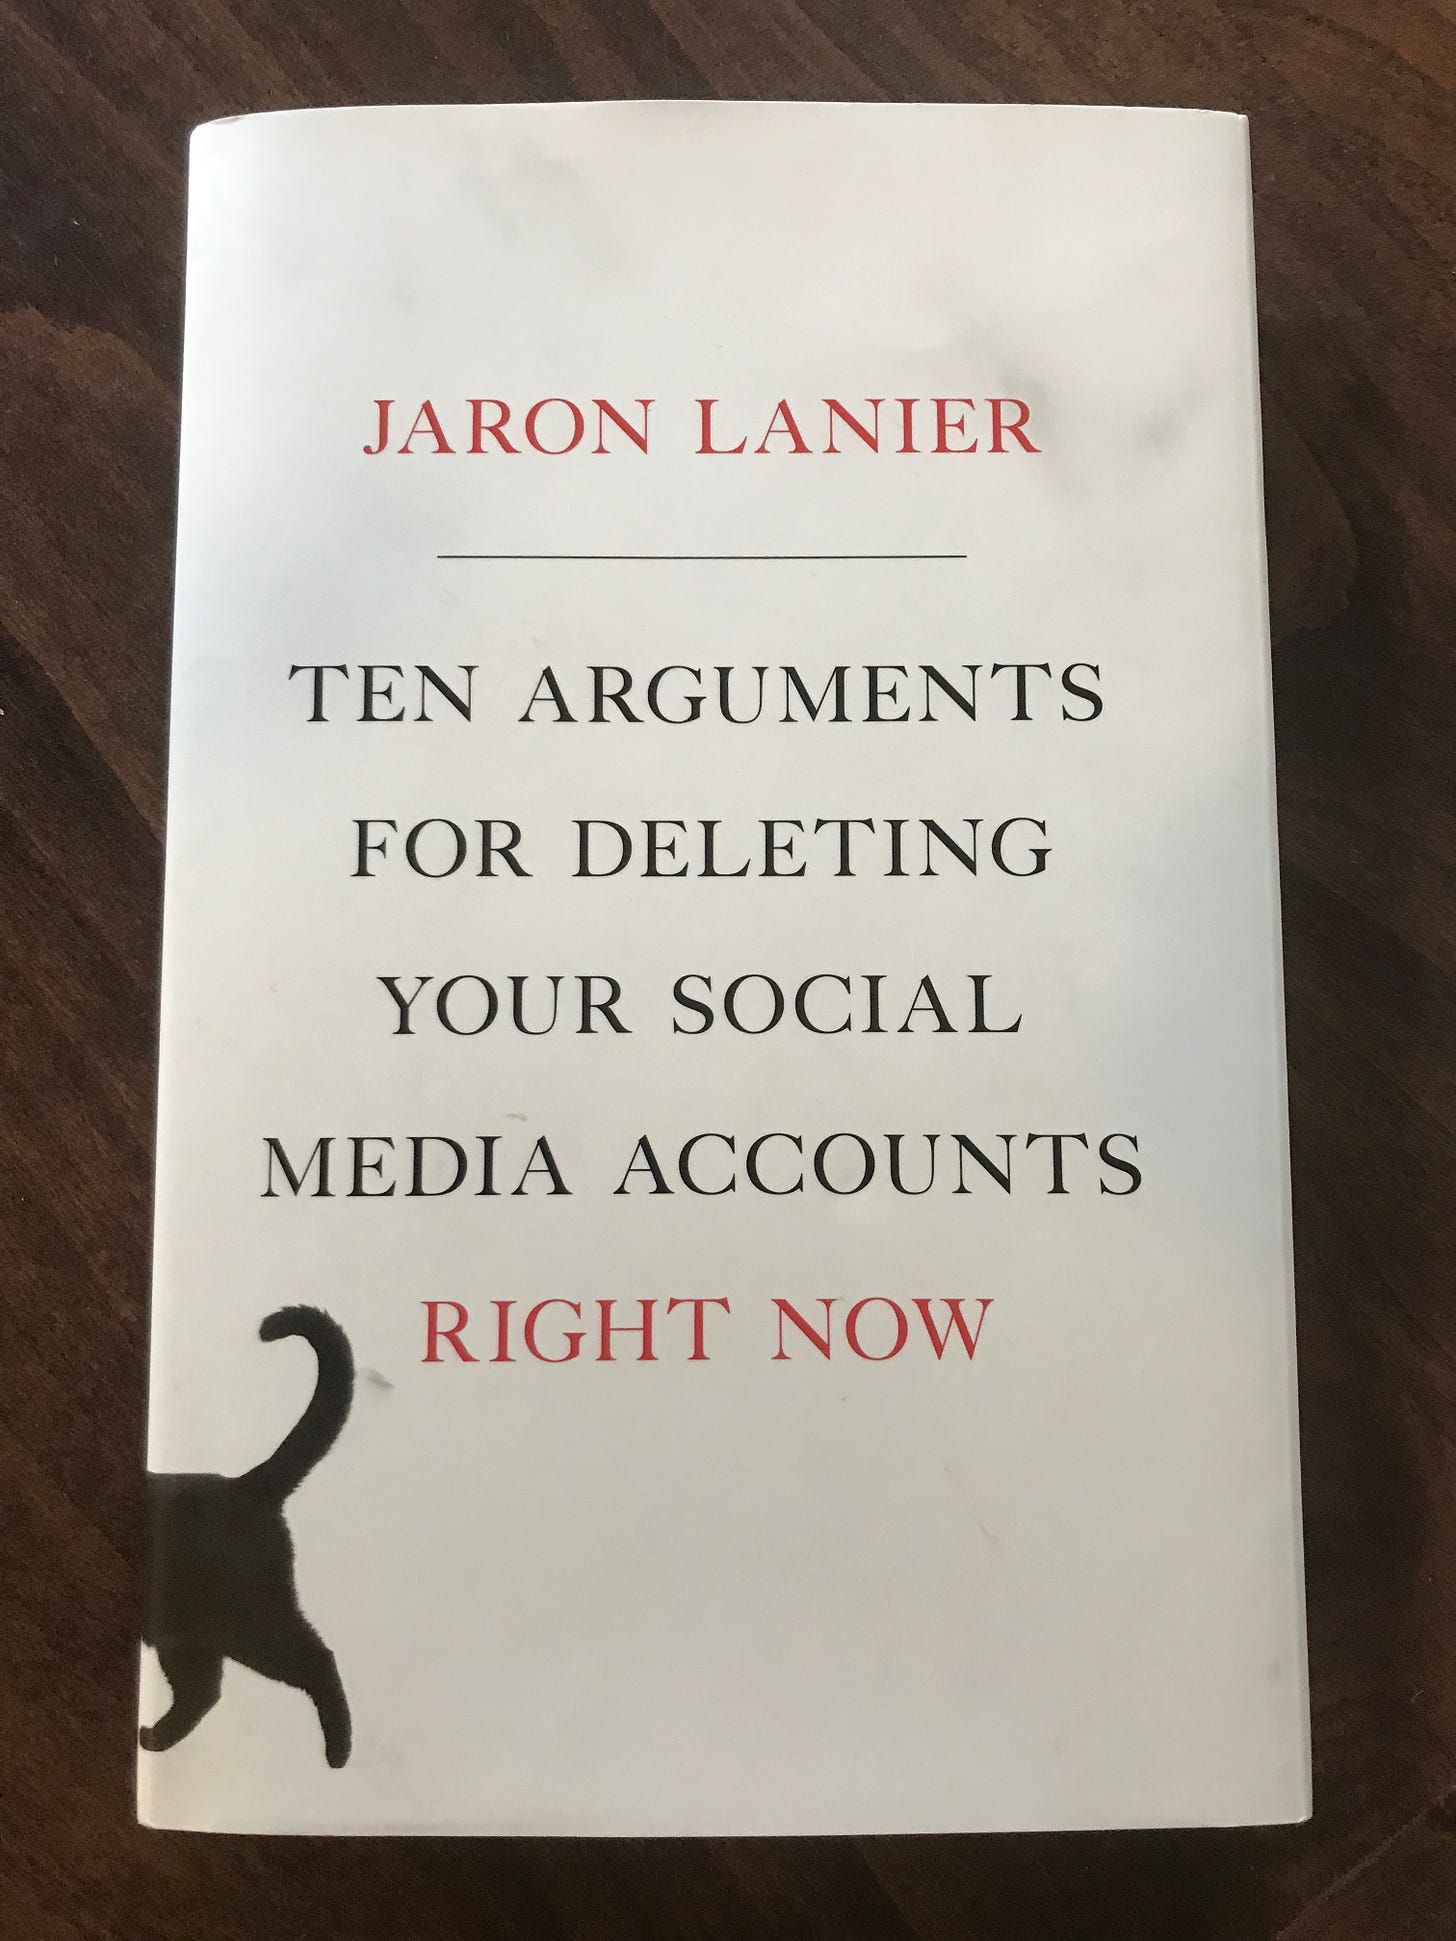 Review: “Ten Arguments For Deleting Your Social Media Accounts Right Now” -  Lieff Ink